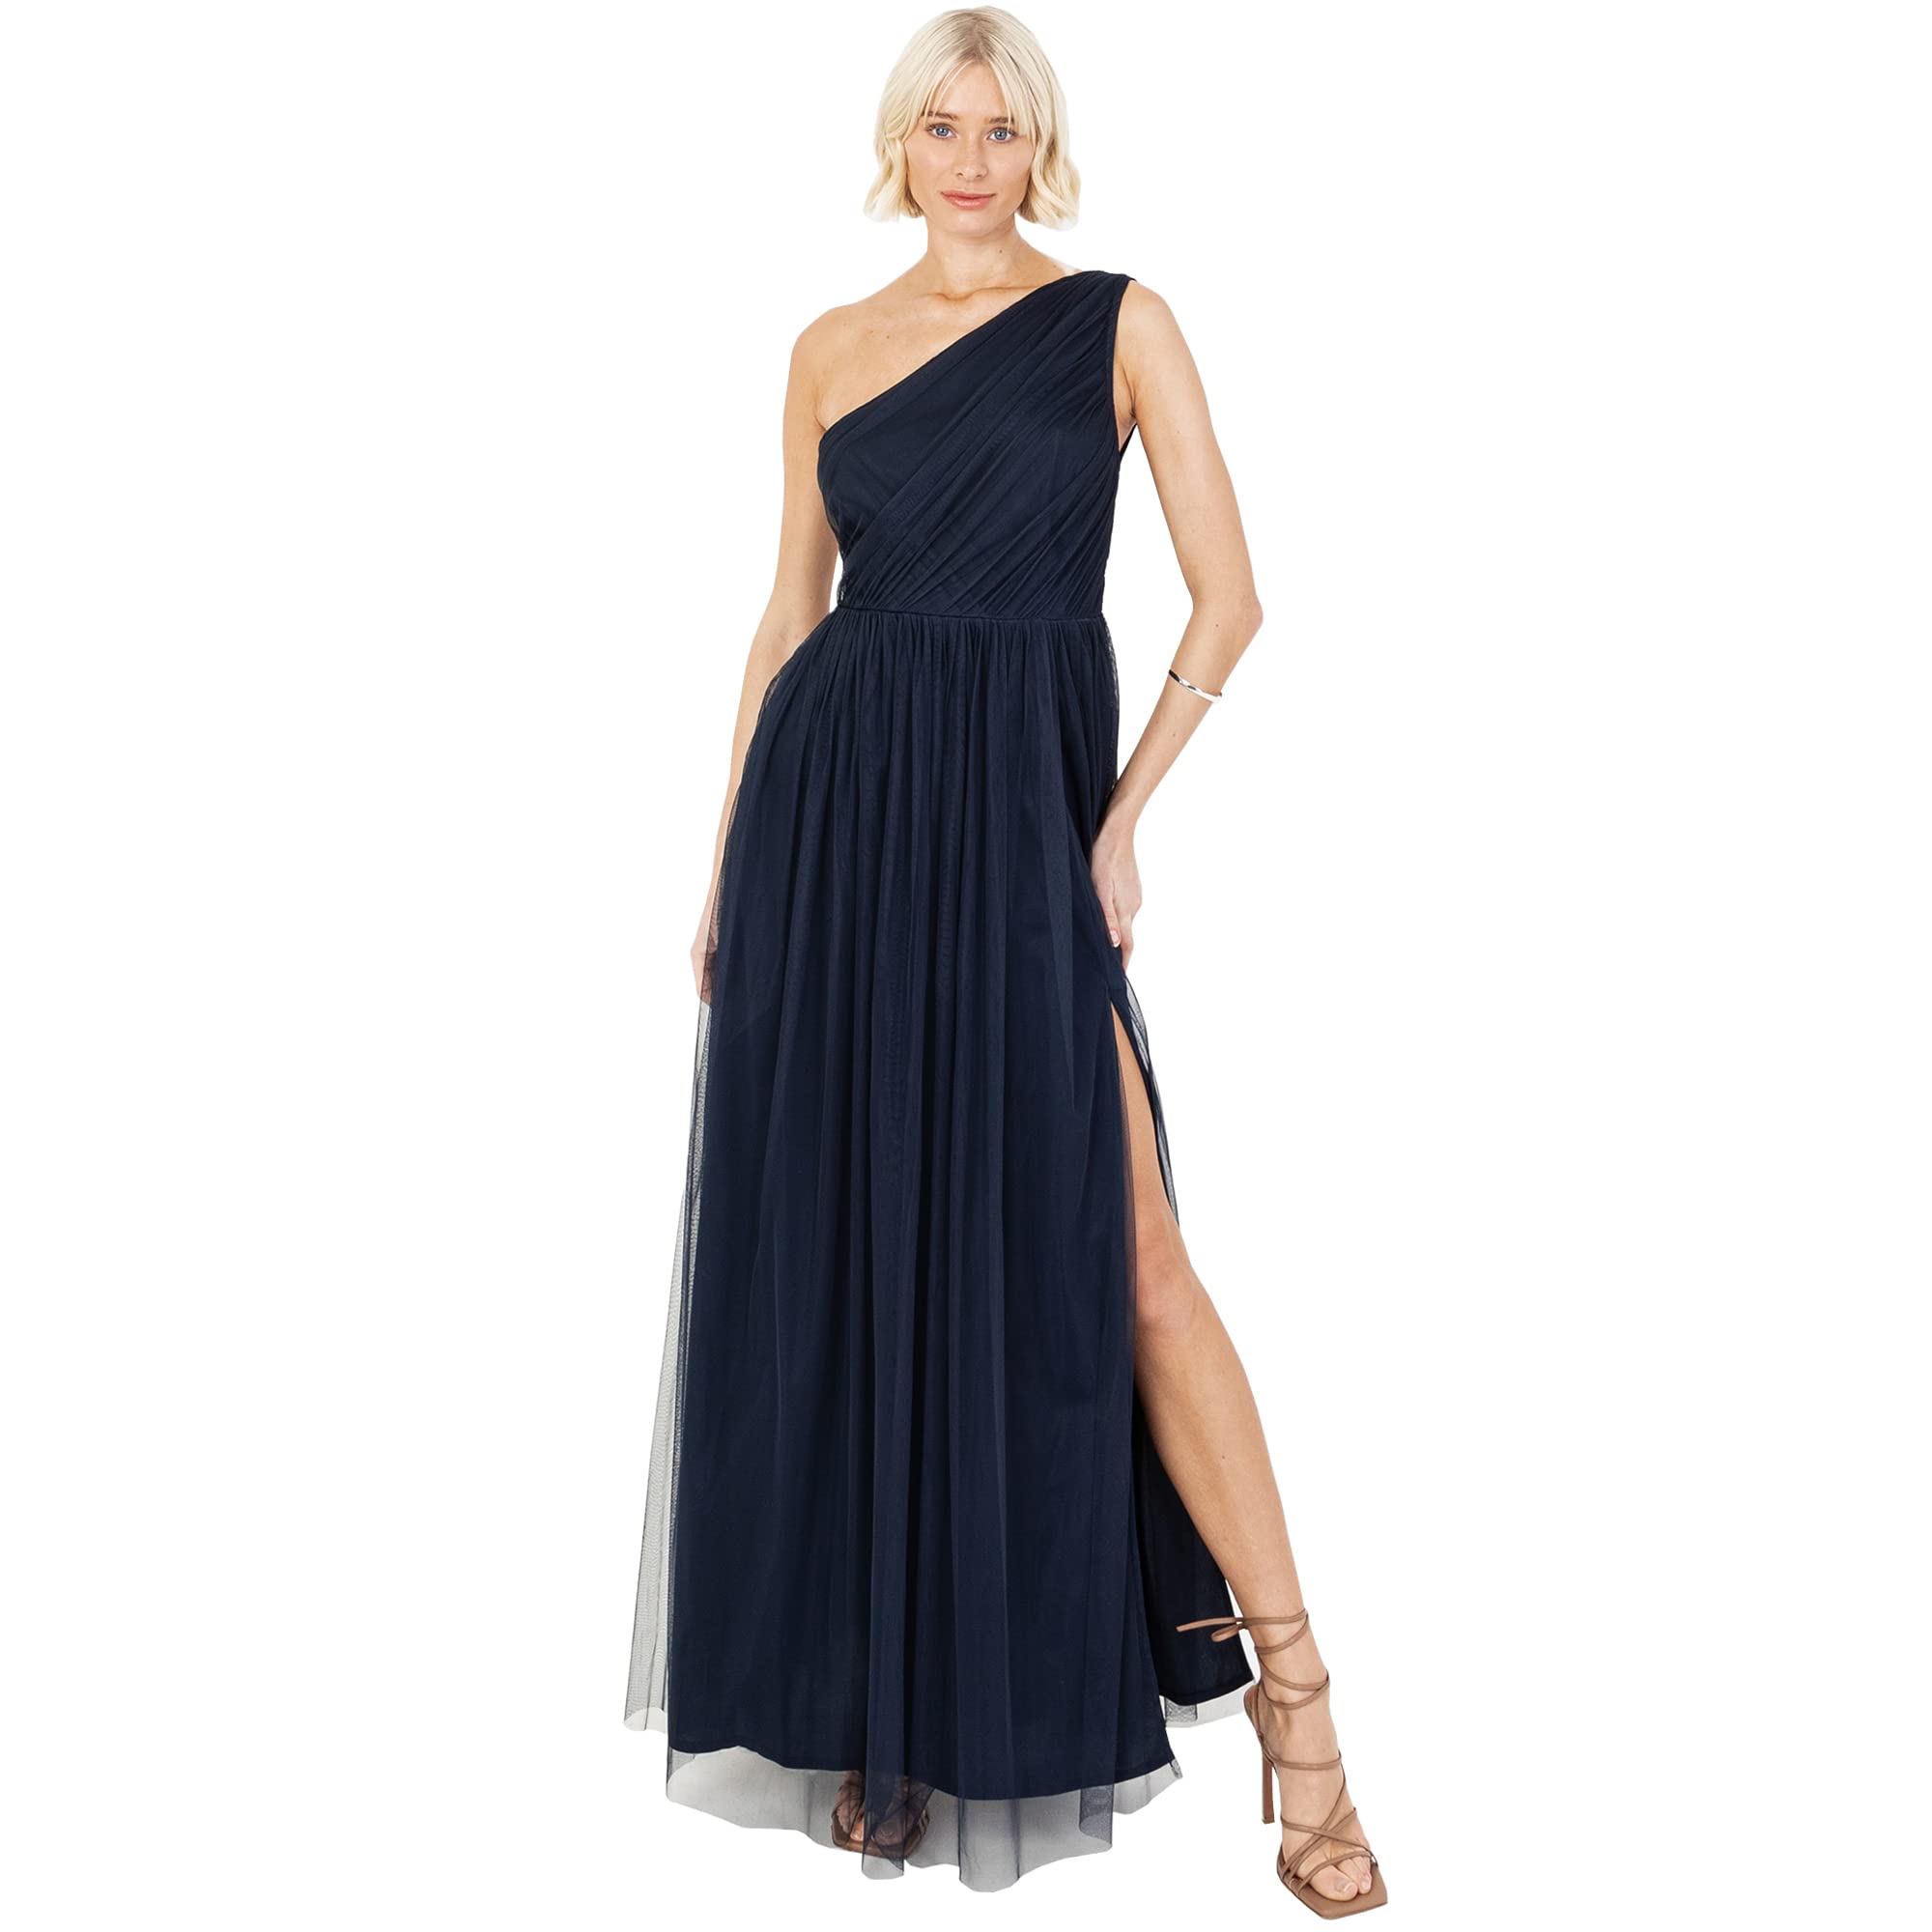 Anaya with Love Damen Womens Ladies Maxi One Cold Shoulder Dress with Slit Split Sleeveless Prom Wedding Guest Bridesmaid Ball Evening Gown Kleid, Navy Blue, 50 EU